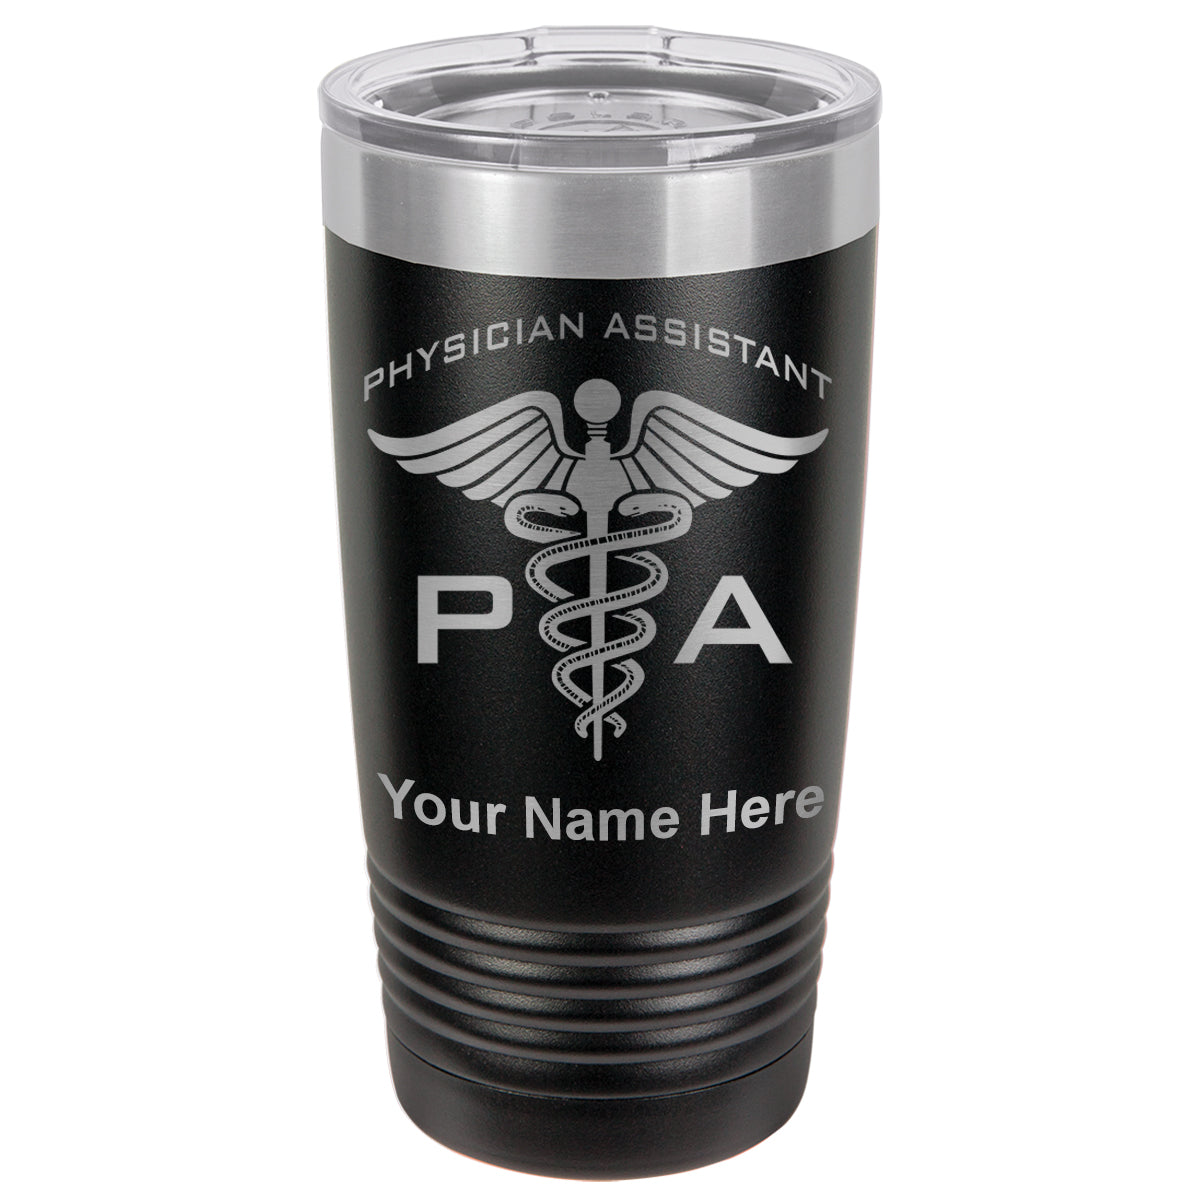 20oz Vacuum Insulated Tumbler Mug, PA Physician Assistant, Personalized Engraving Included